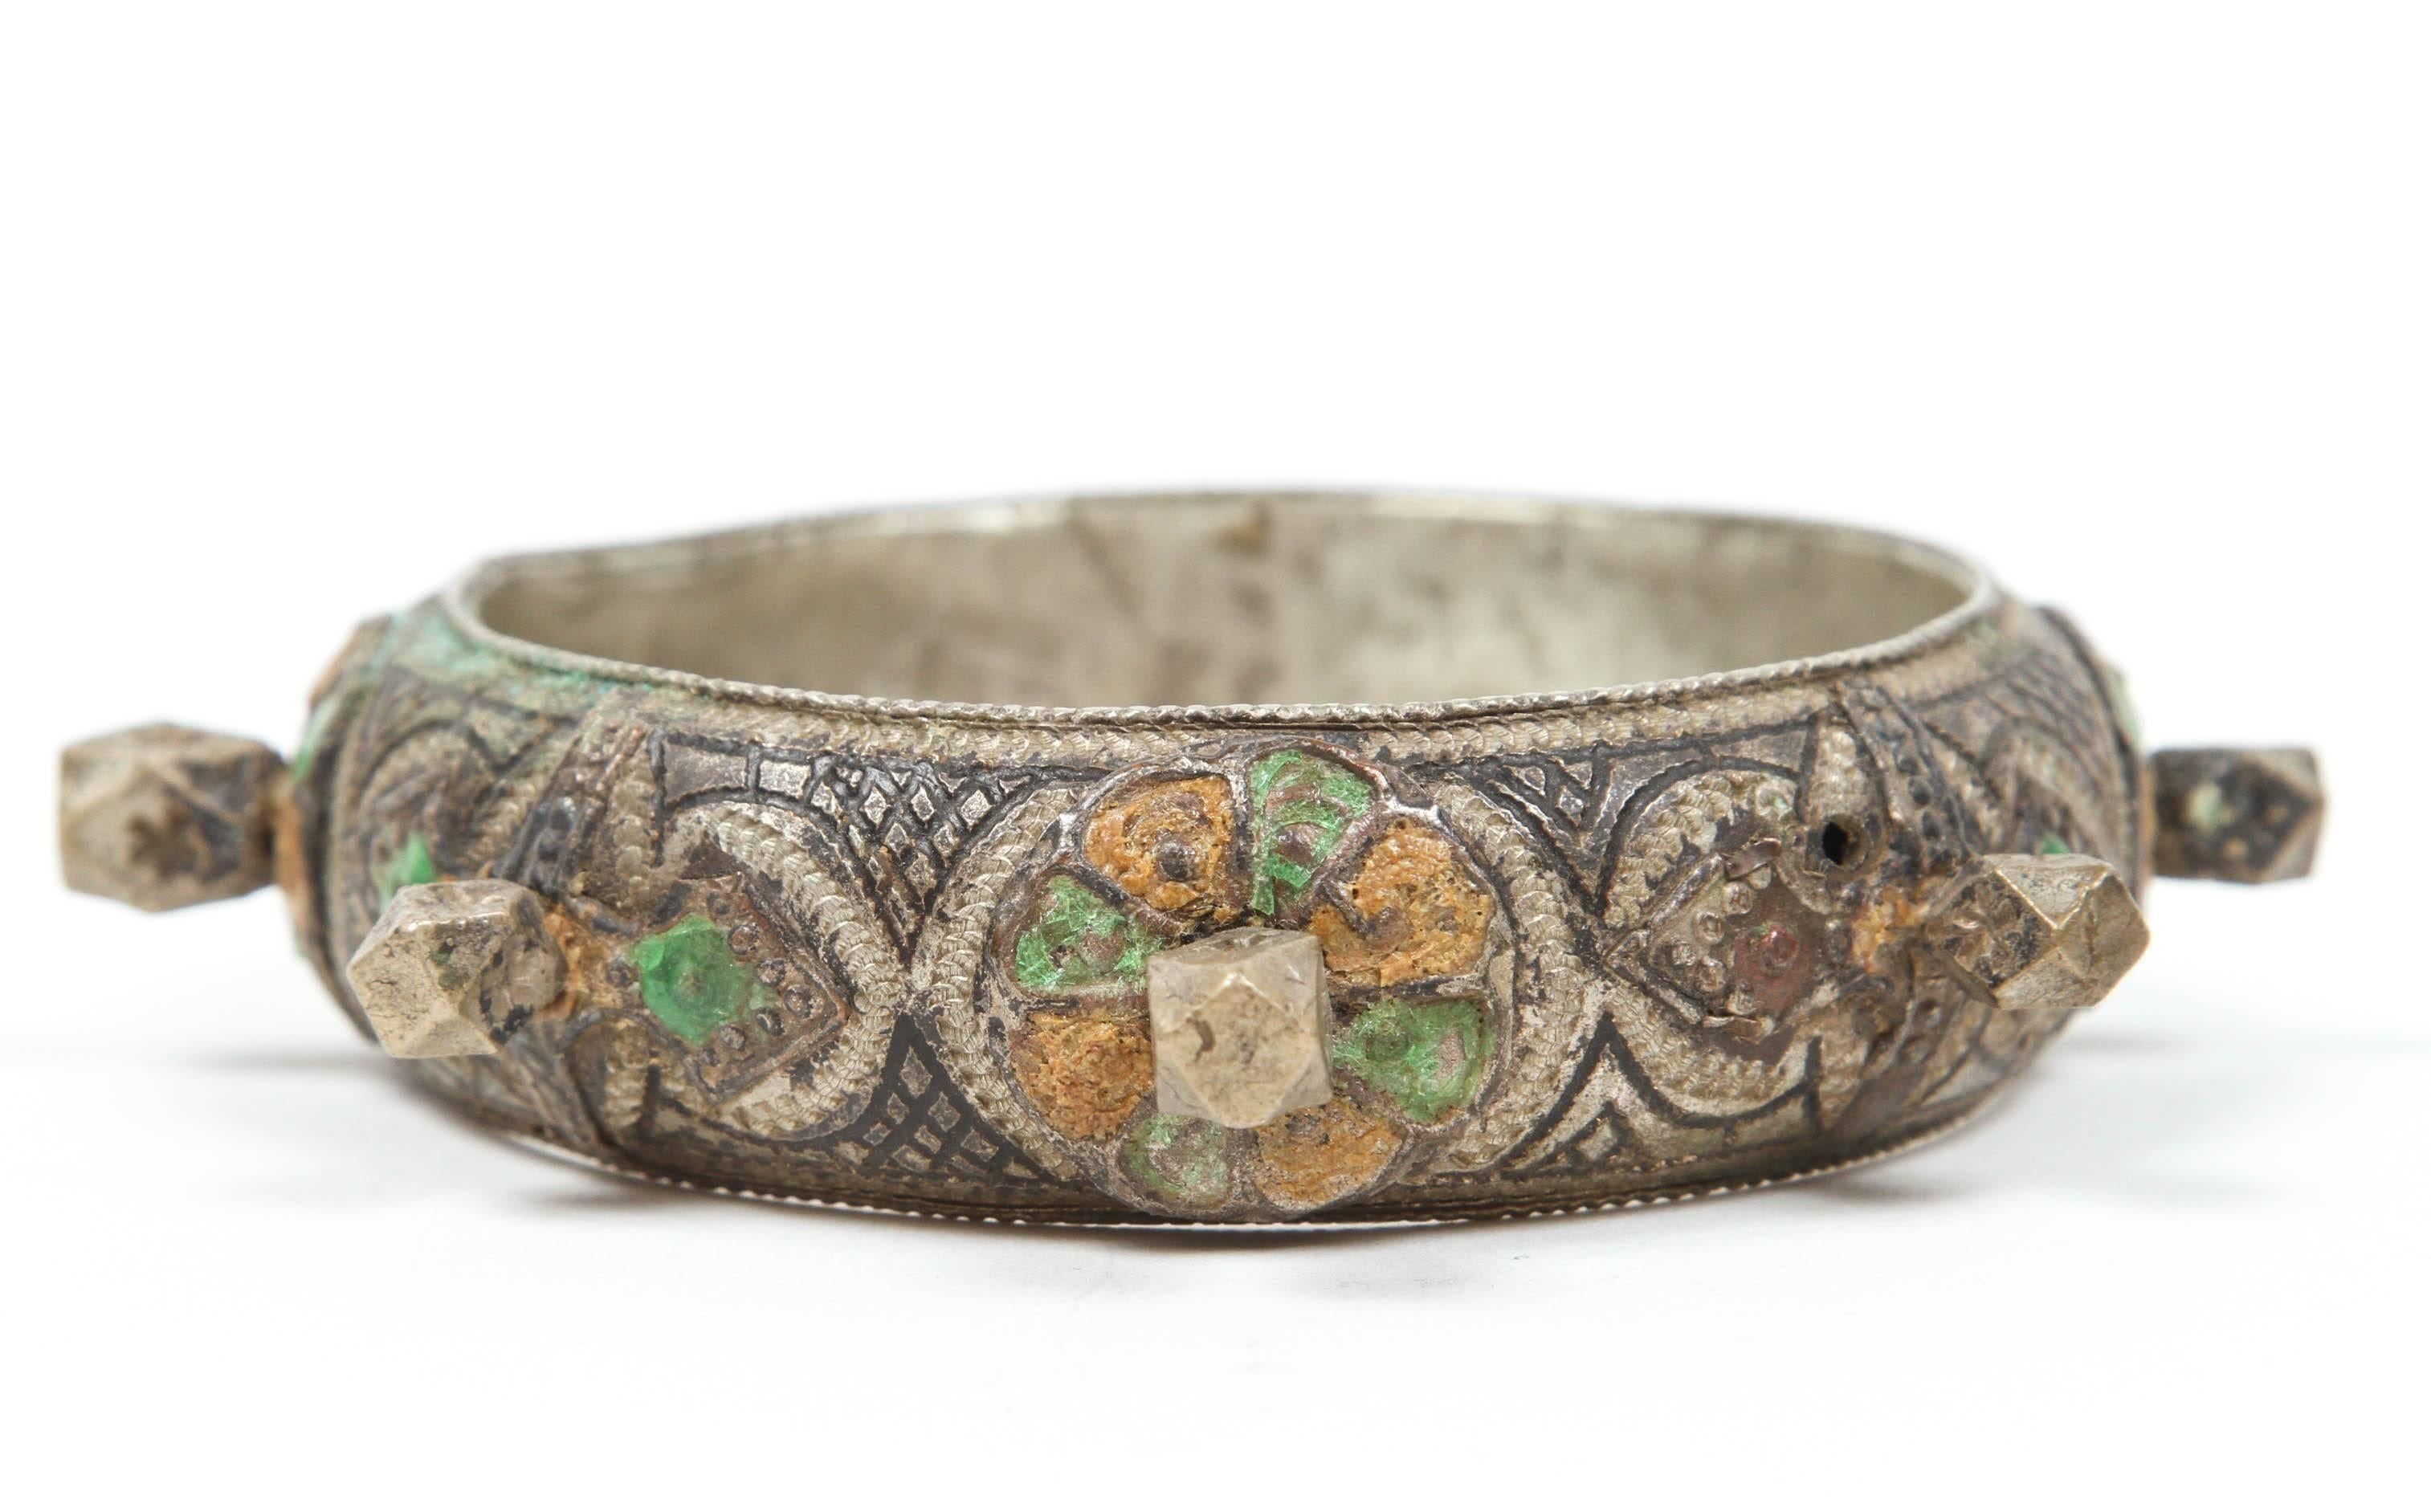 A 1920s handcrafted Ethnic bracelet by Berber women of Morocco.
Women wear this kind of bracelet and silver jewelry for special ceremonies and wedding. 
Silver, but not of the standard of sterling.
Richly embellished with applied silver spikes and